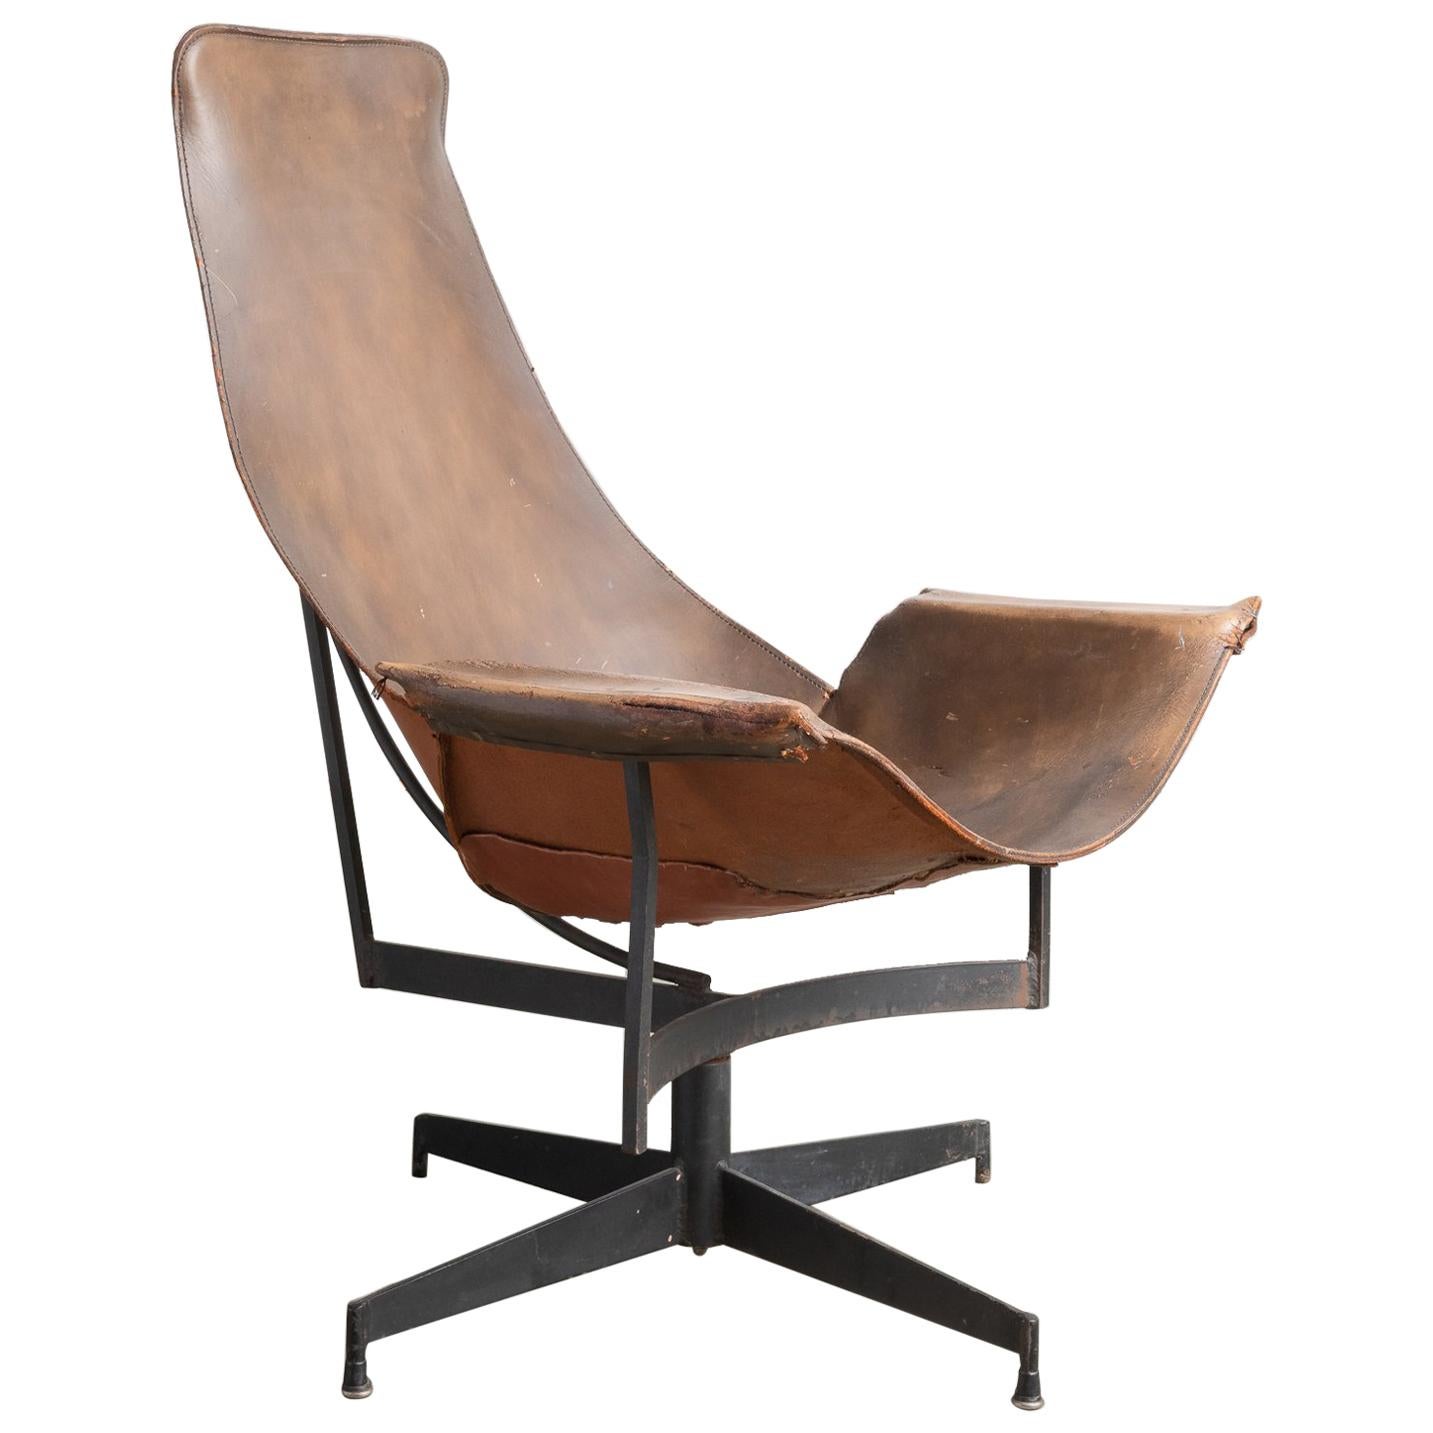 Leather Sling Chair by William Katavolos, Germany, circa 1950